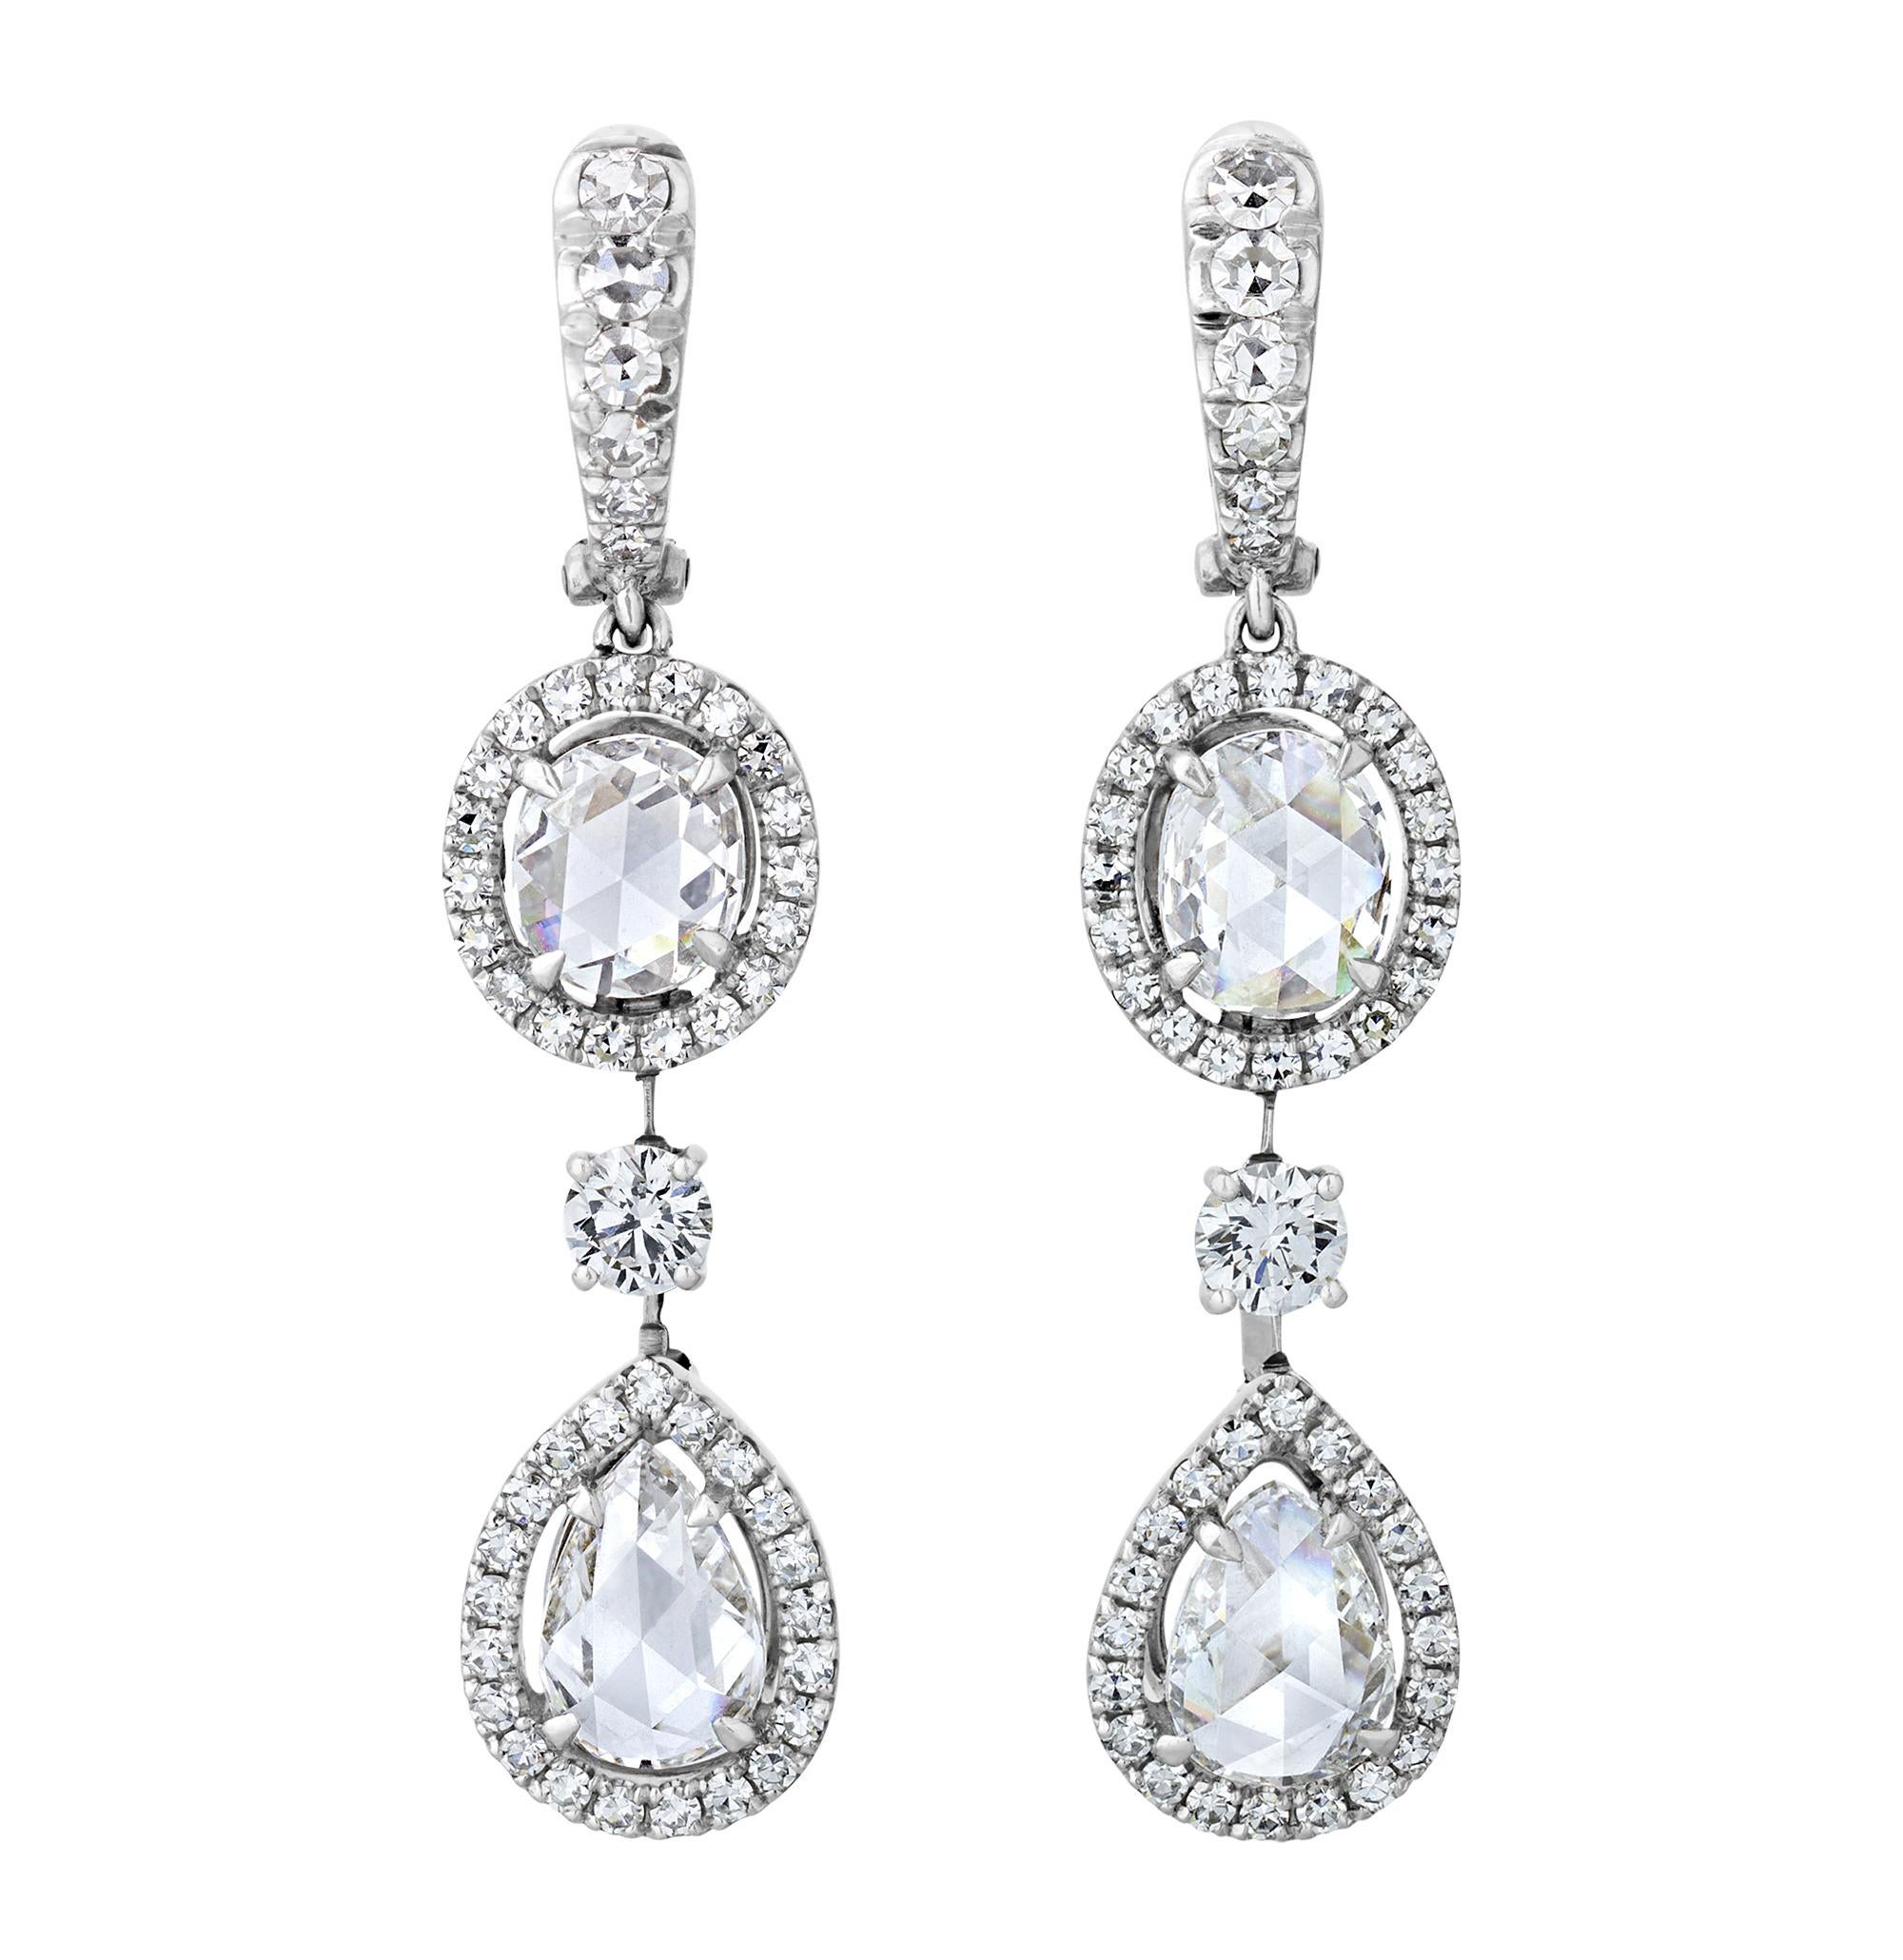 This exquisite matching set of a diamond necklace and earrings showcases an impressive 42.11 carats of rose cut diamonds, complemented by 19.17 carats of round brilliant-cut diamonds. Designed reminiscent of great Victorian jewelry masterpieces, the